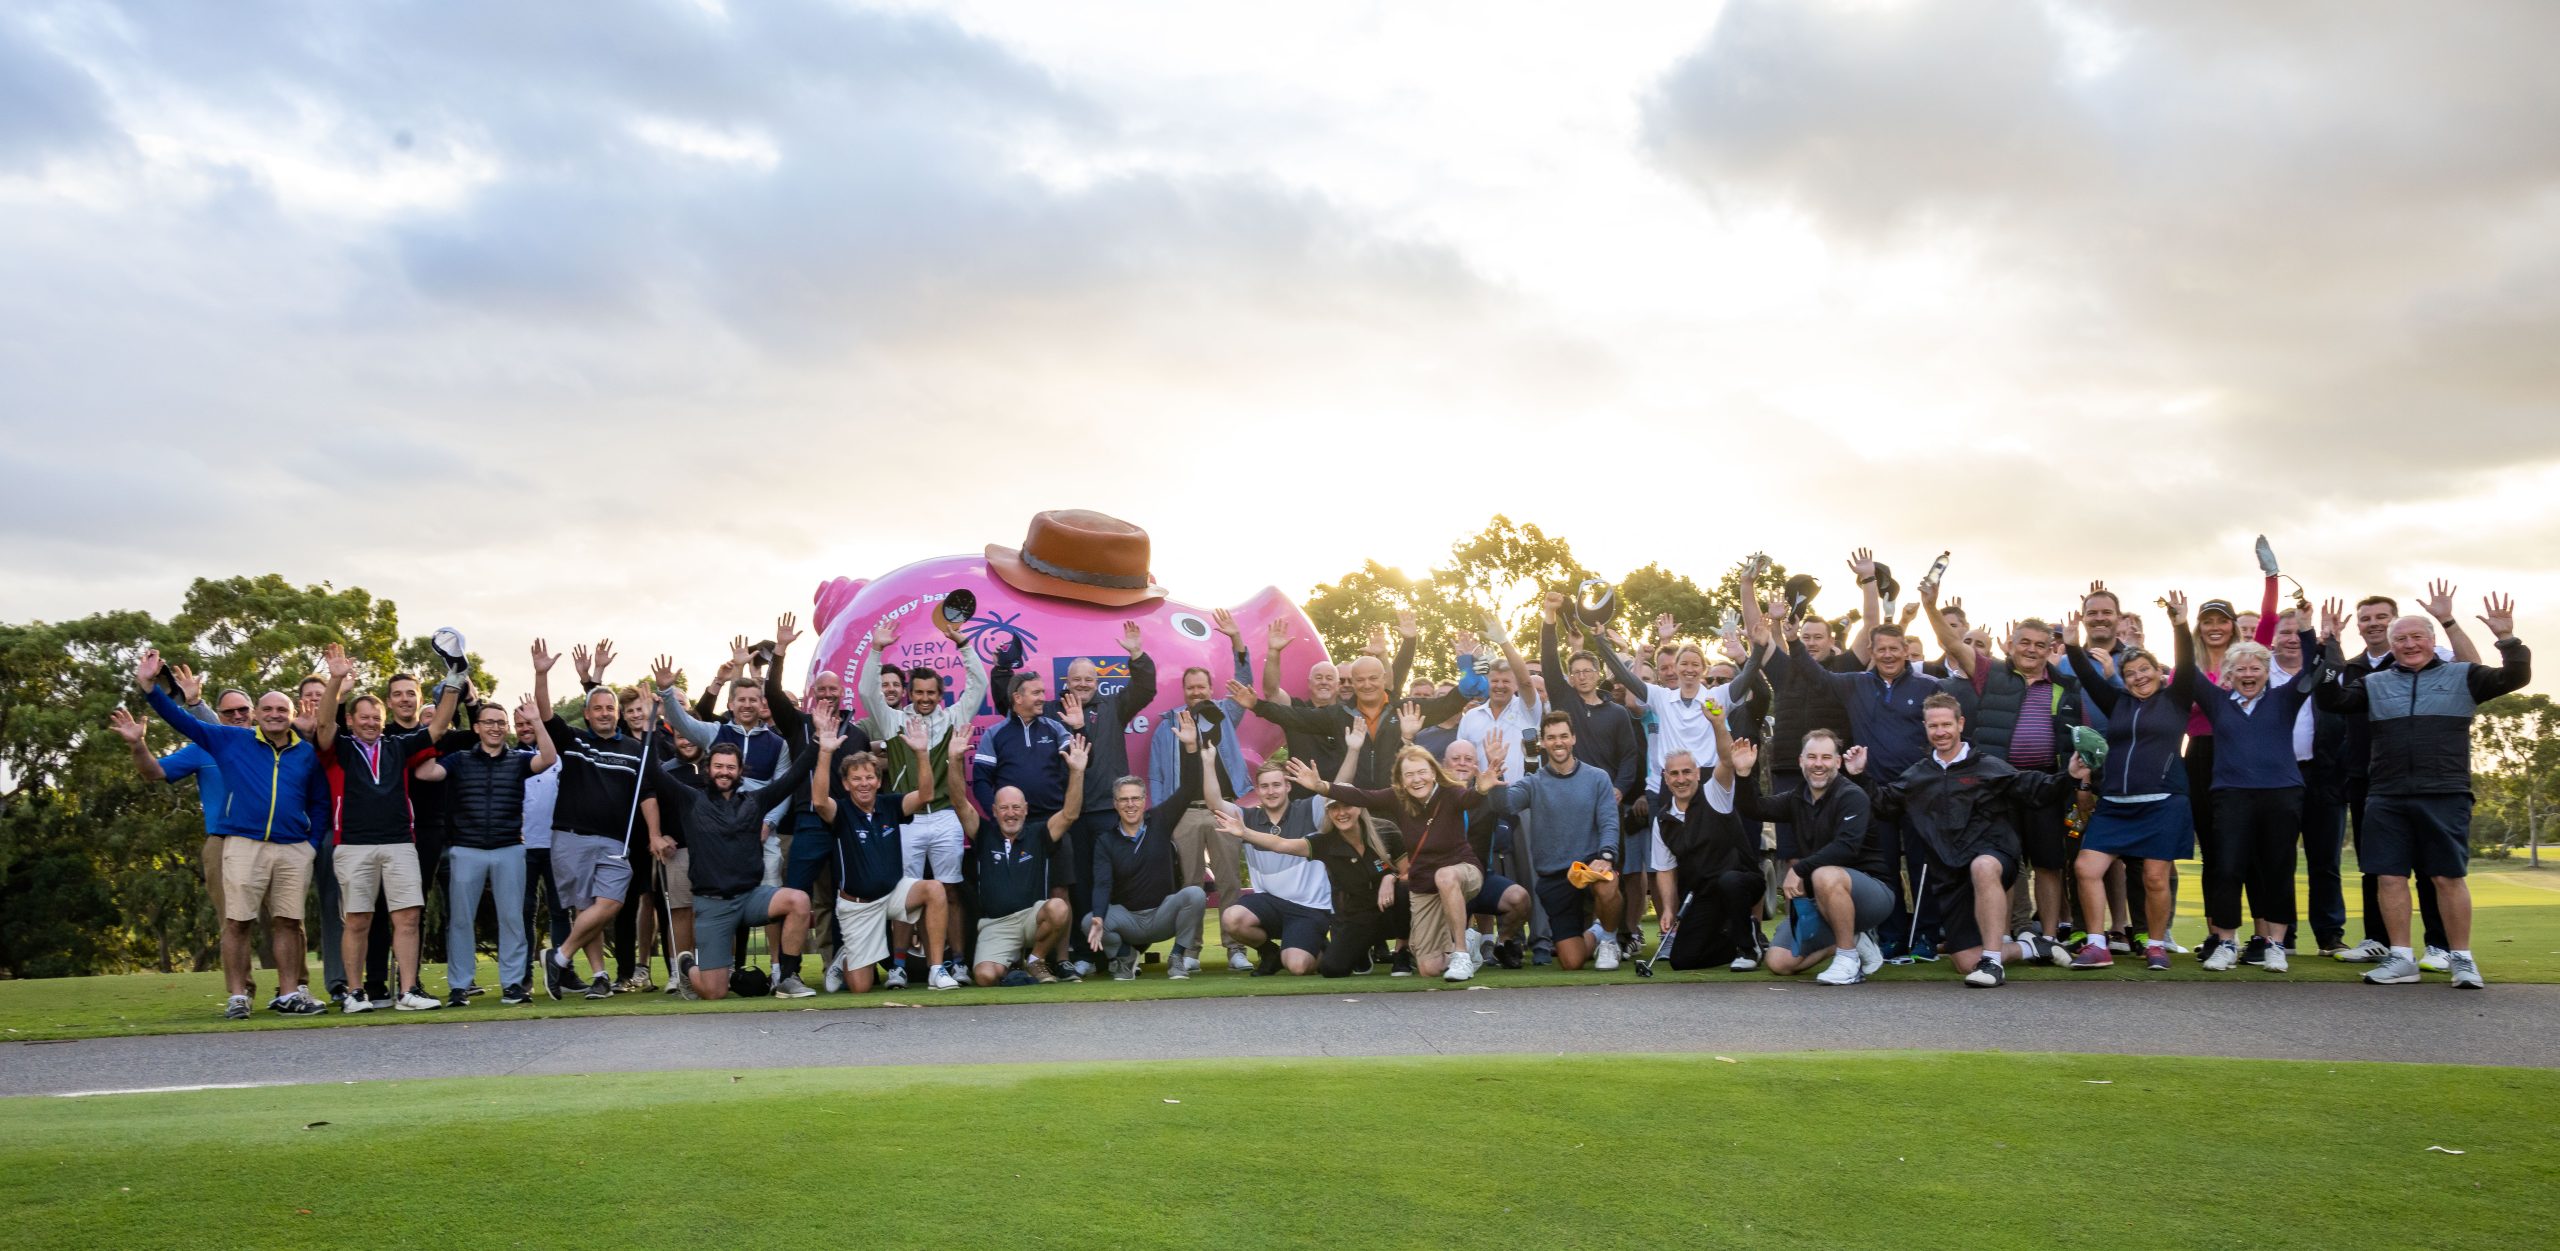 A large group of people are standing outdoors, in front of a giant piggy bank, with the sunrise behind. They have their arms in the air and are smiling at the camera.